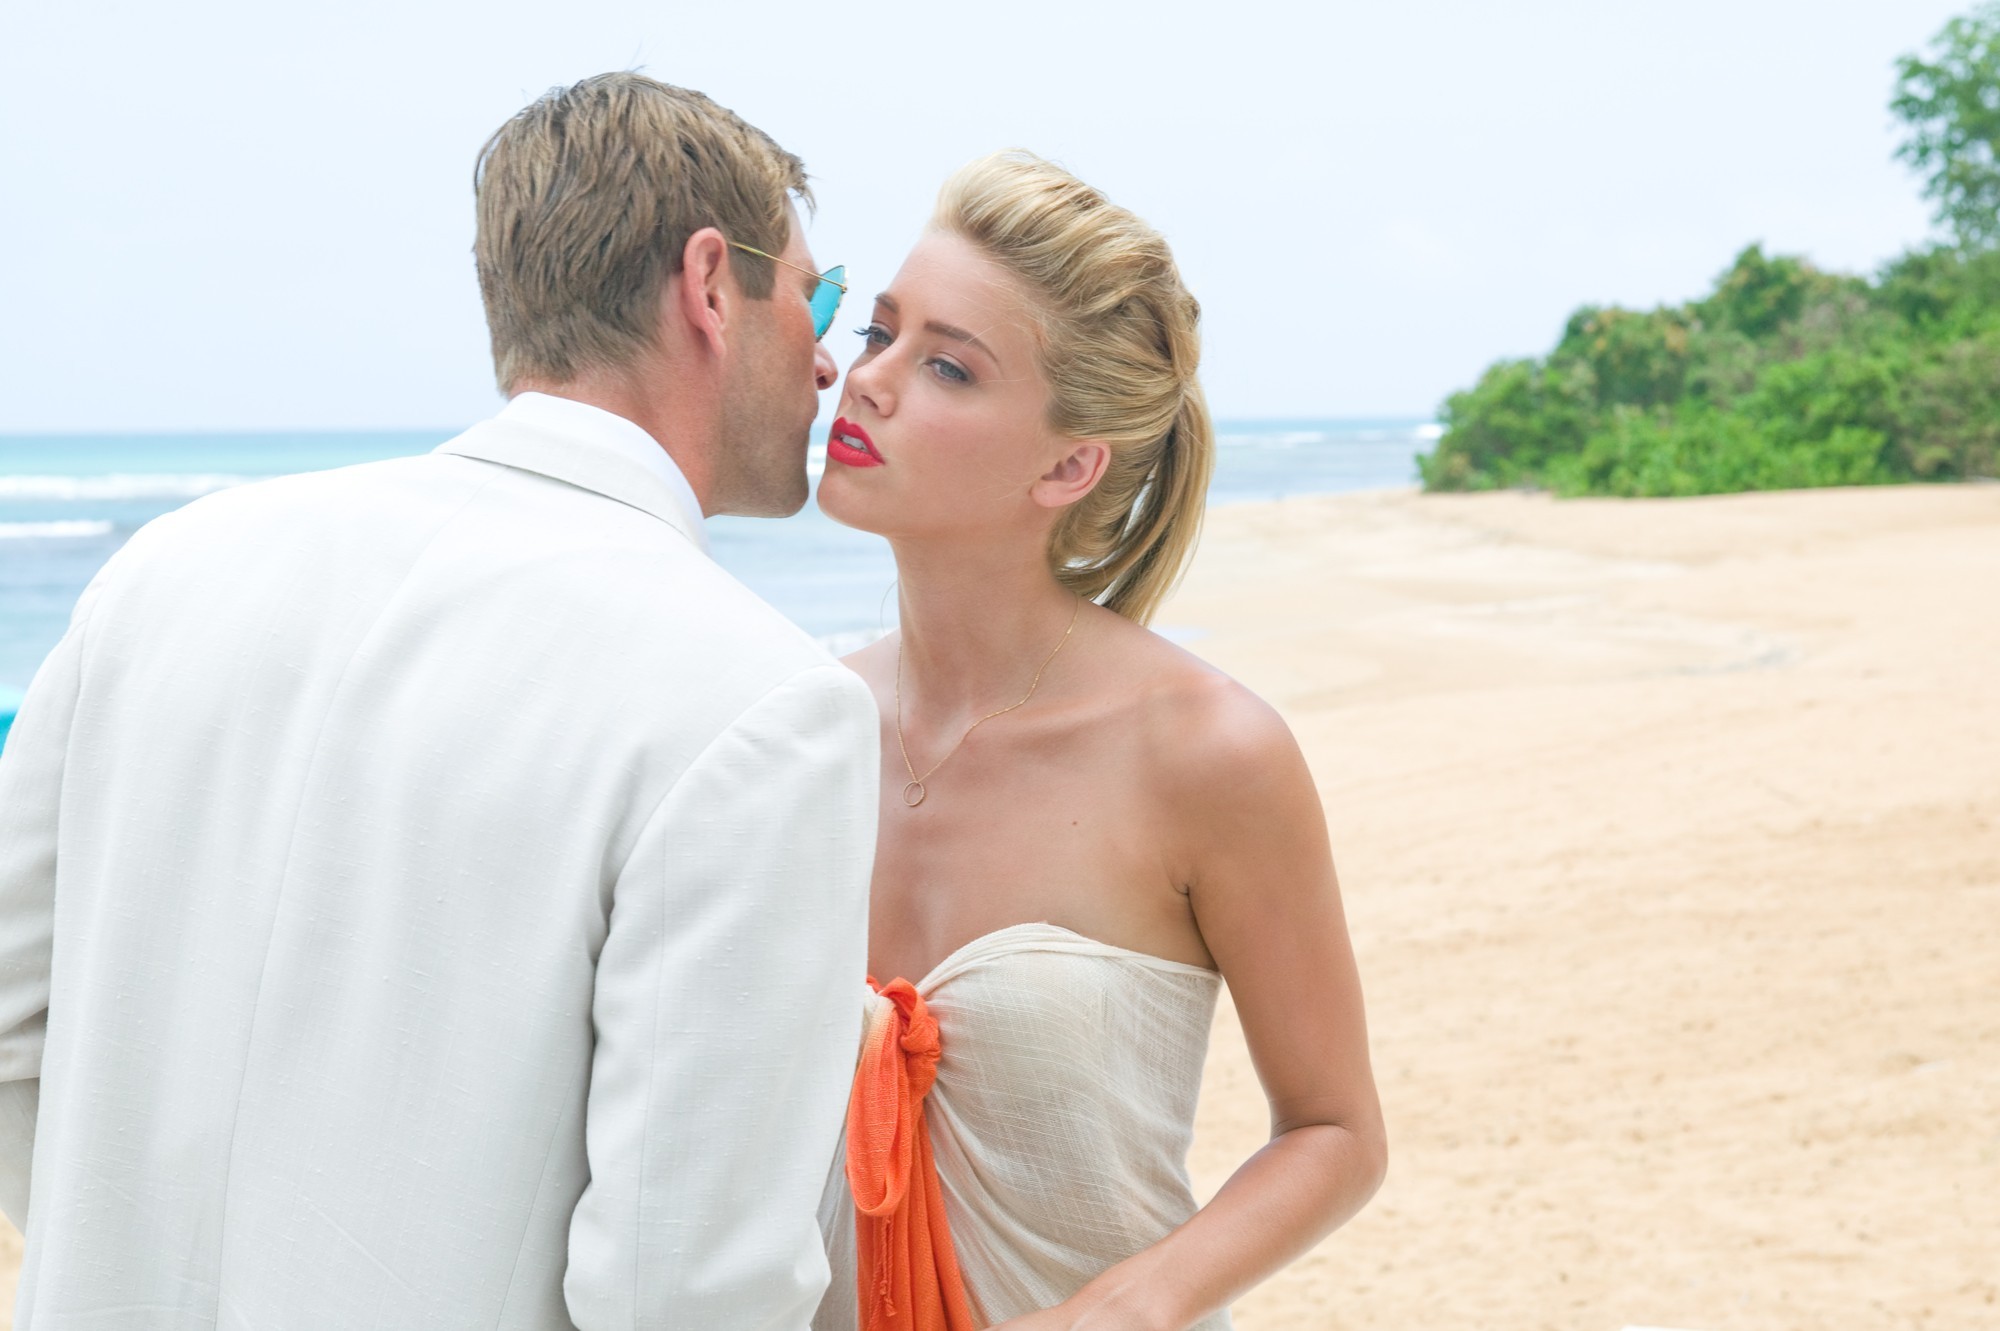 Aaron Eckhart stars as Sanderson and Amber Heard stars as Chenault in FilmDistrict's The Rum Diary (2011). Photo credit by Peter Mountain.